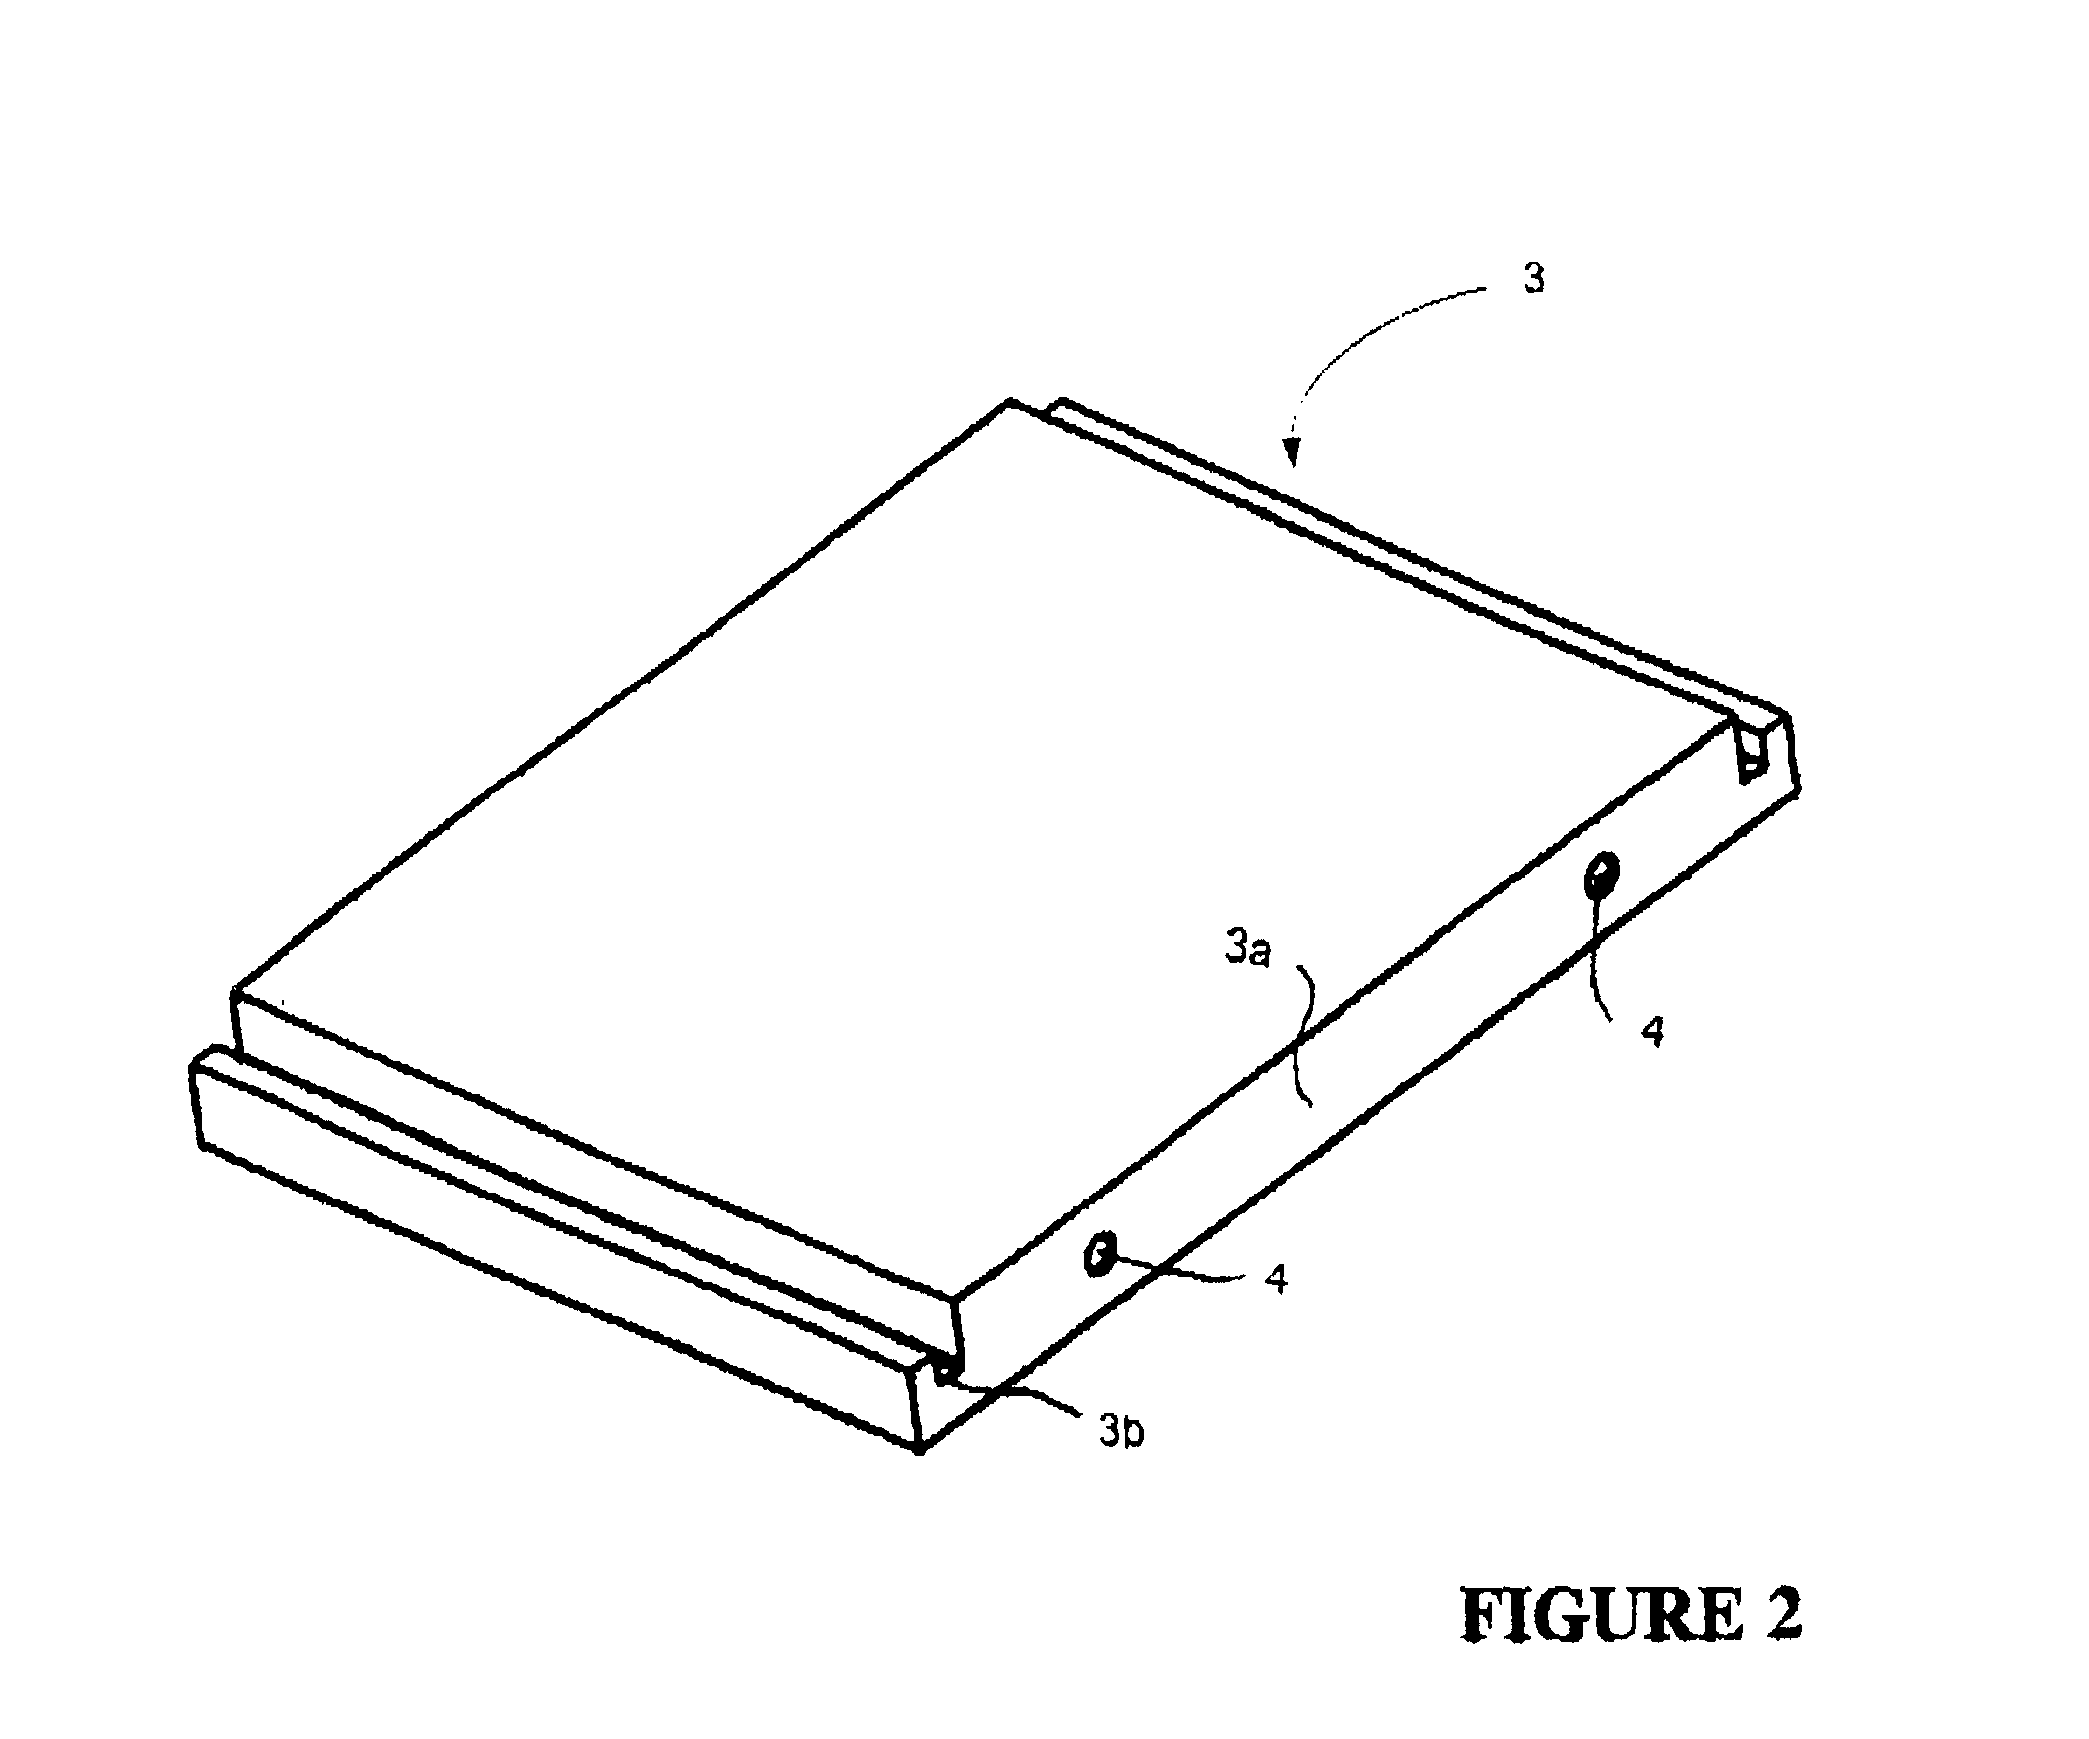 Folded-fin heat sink assembly and method of manufacturing same